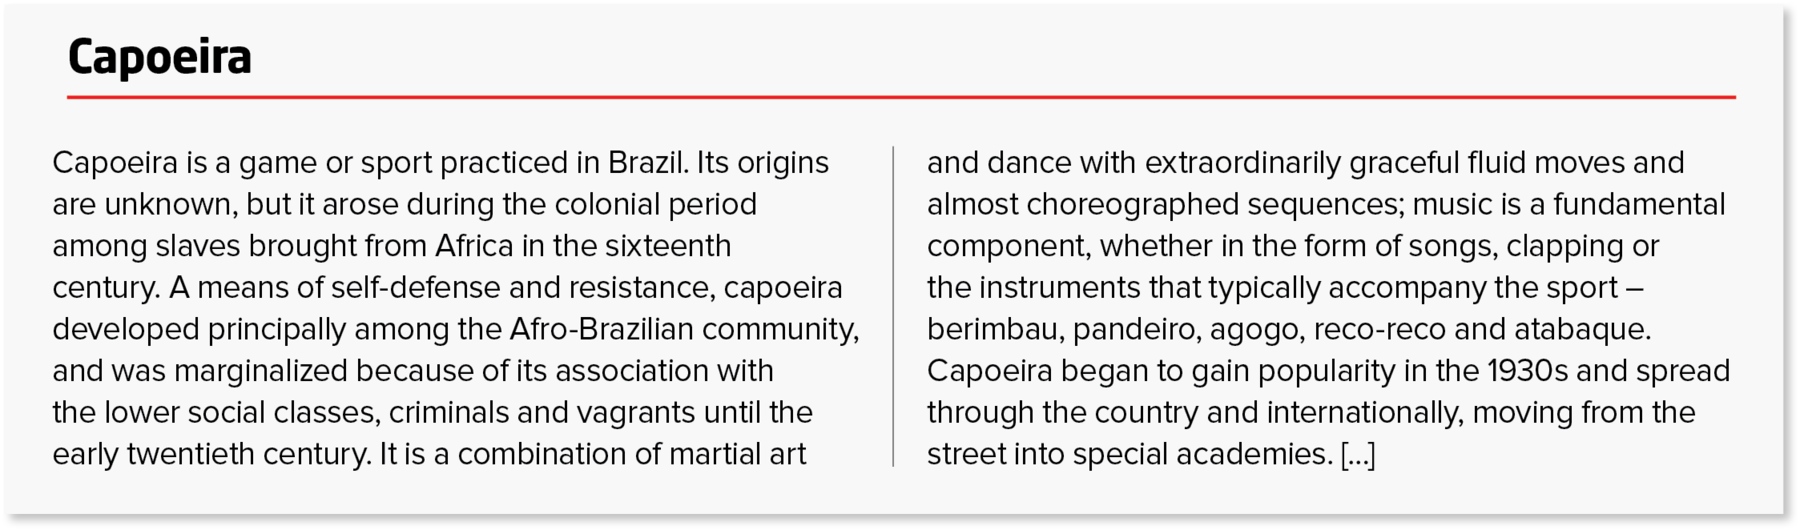 Página de enciclopédia. Título: Capoeira. Capoeira is a game or sport practiced in Brazil. Its origins are unknown, but it arose during the colonial period among slaves brought from Africa in the sixteenth century. A means of self-defense and resistance, capoeira developed principally among the Afro-Brazilian community, and was marginalized because of its association with the lower social classes, criminals and vagrants until the early twentieth century. It is a combination of martial art and dance with extraordinarily graceful fluid moves and
almost choreographed sequences; music is a fundamental component, whether in the form of songs, clapping or the instruments that typically accompany the sport – berimbau, pandeiro, agogo, reco-reco and atabaque. 
Capoeira began to gain popularity in the 1930s and spread through the country and internationally, moving from the street into special academies. […]